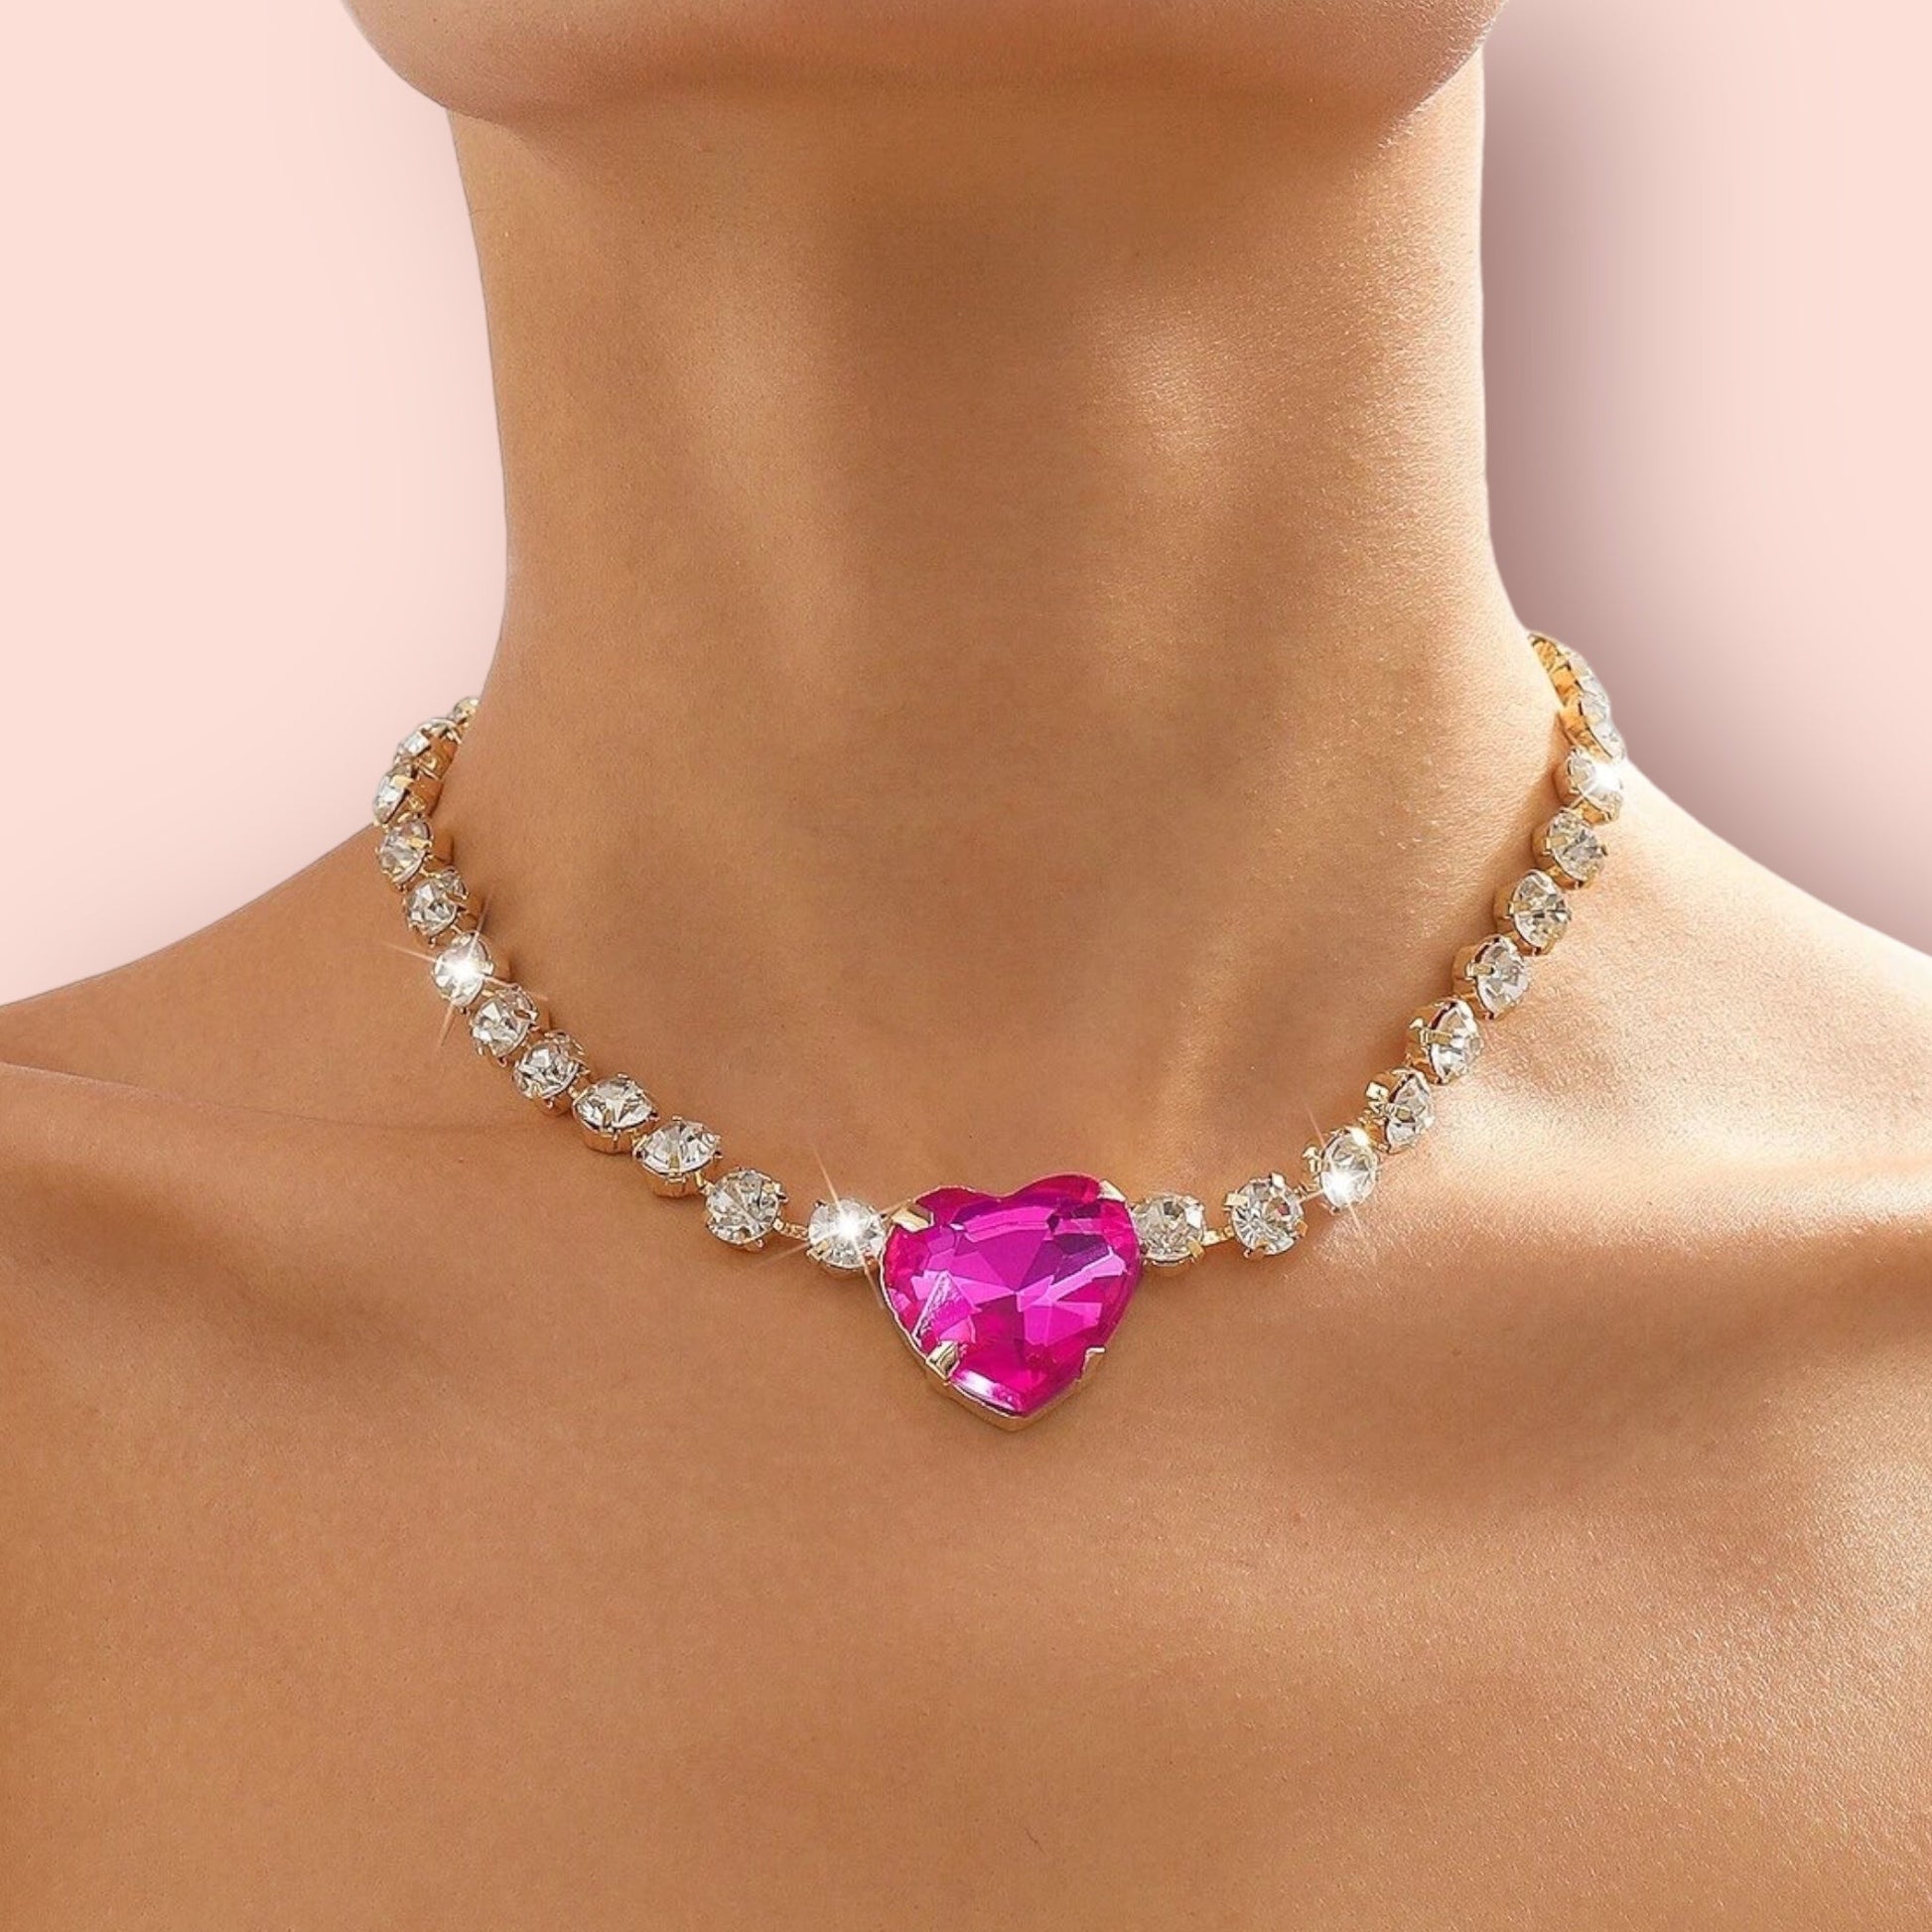 Can You Feel It Hot Pink Bling Necklace-